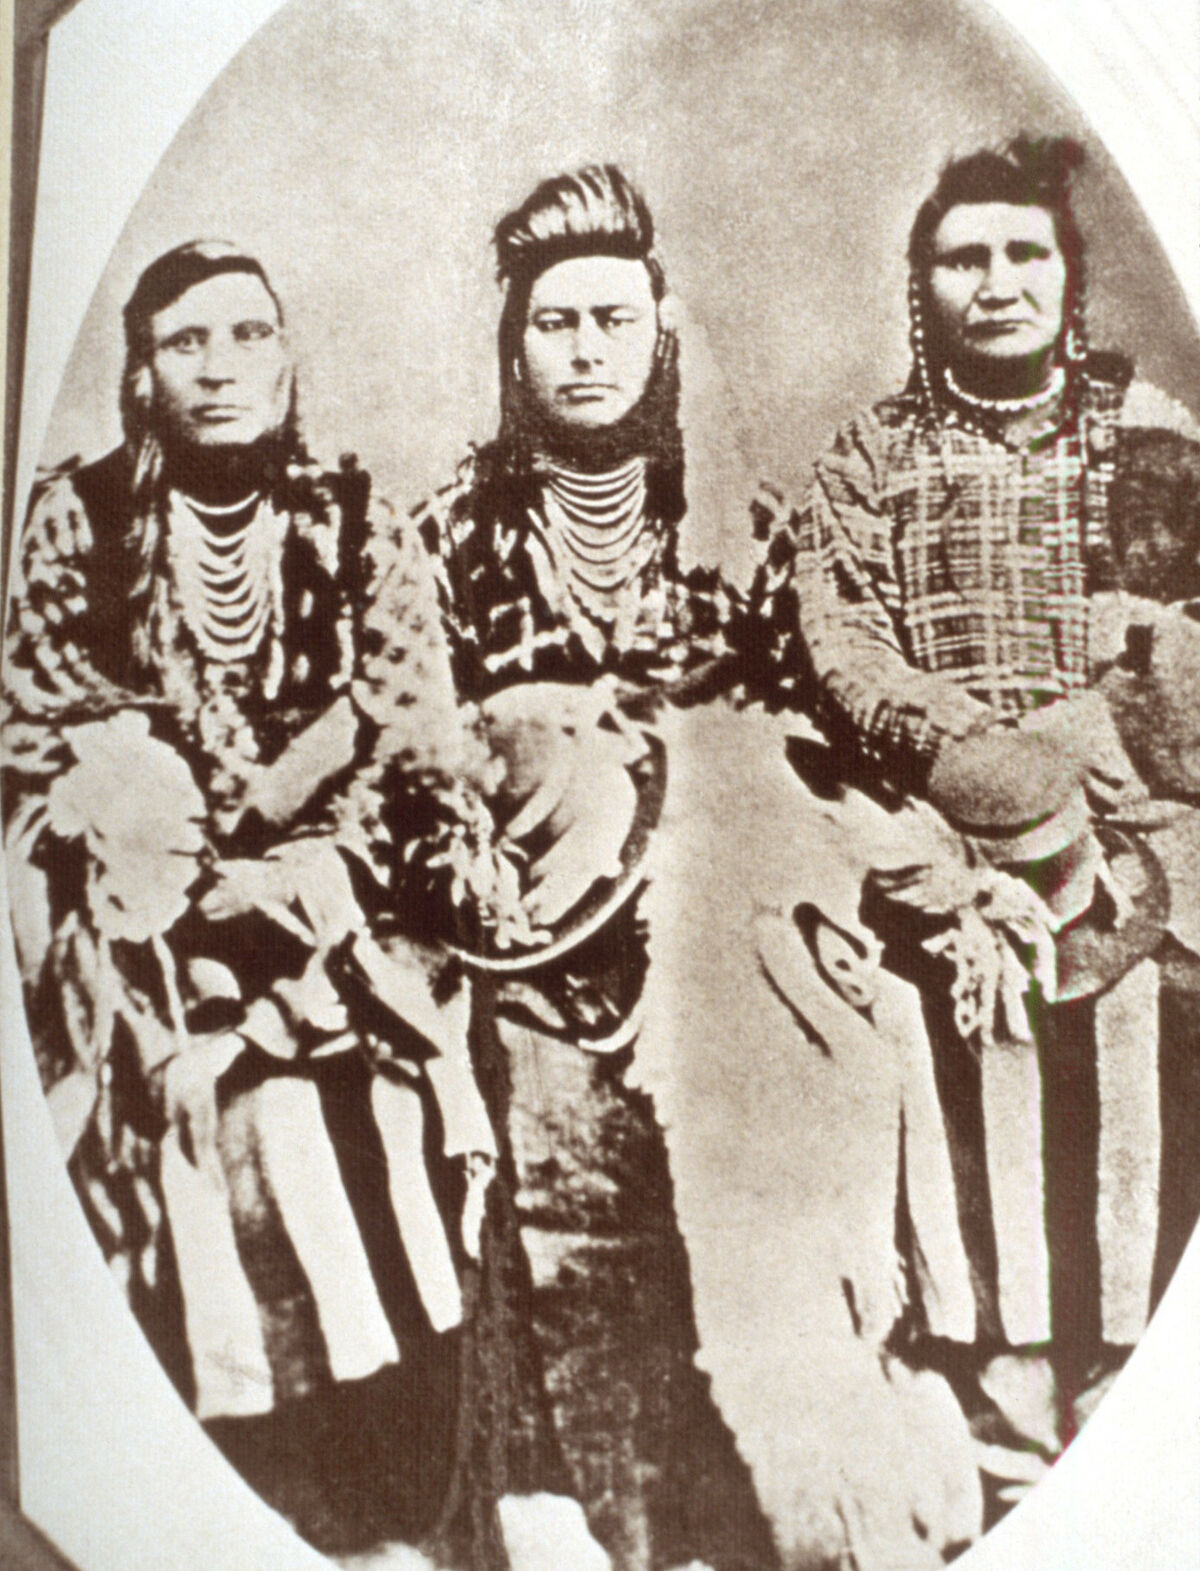 The Library of Congress says of this image, “Caption identifies sitters as Eagle of Light, Nez Perce; Joseph, Nez Perce; and (Smohollah). However, Bill Gulick in Chief Joseph Country: Land of the Nez Perce, 1981, identifies sitters in this image as Billy Carter, Ollokot (Chief Joseph's brother) and Middle Bear.” Further, the photo in slide 023 has cut out a close-section of the middle man and labeled him as Ollokot as well. Taken by Charles W Phillips.